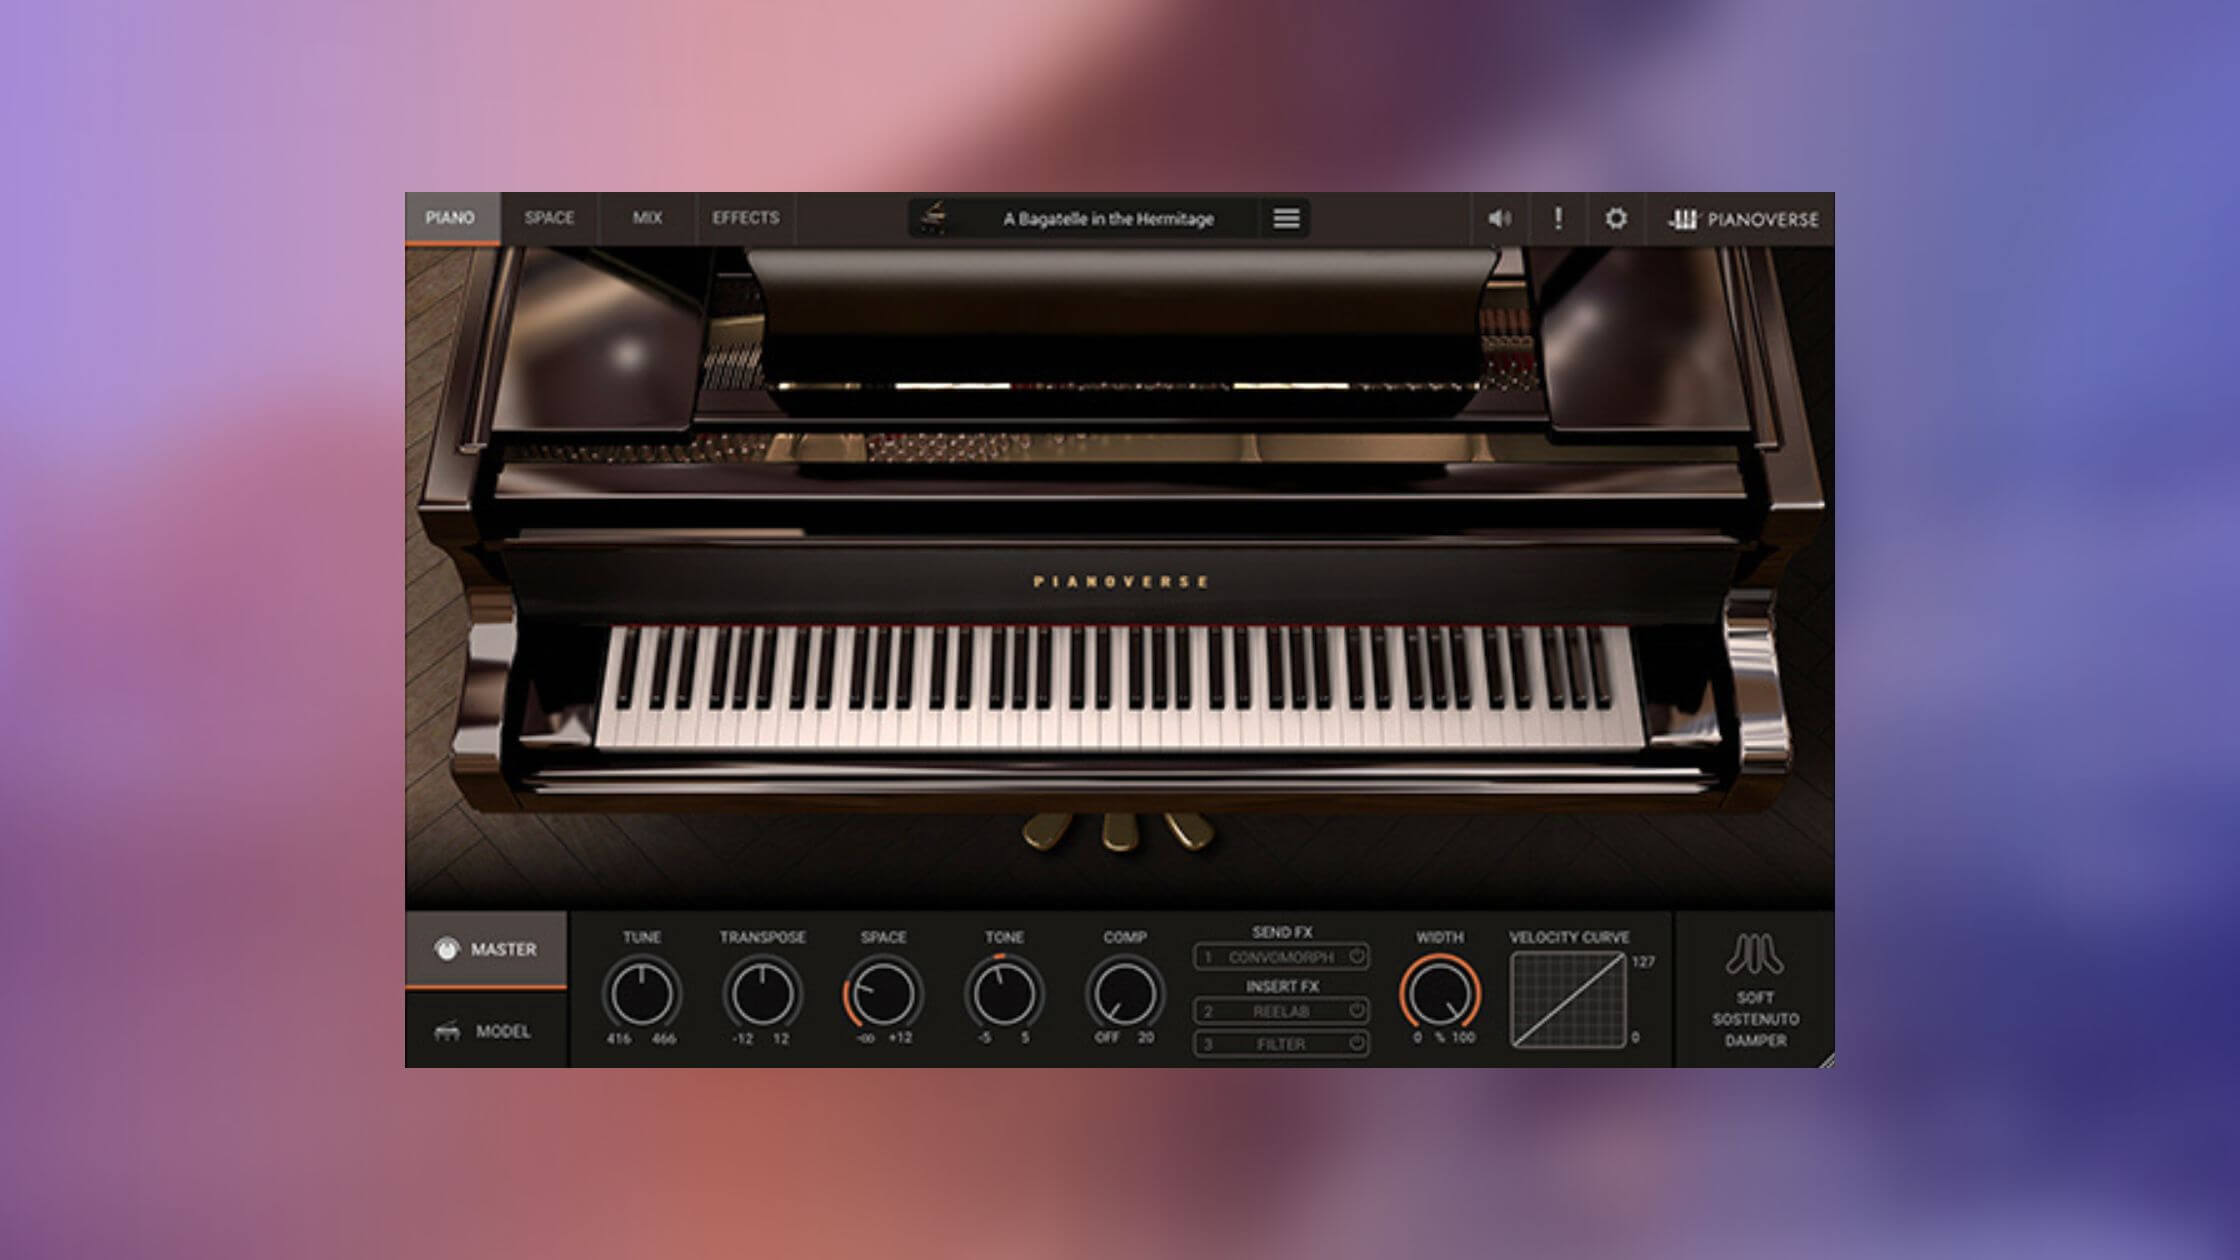 IK Multimedia’s Pianoverse will enhance your compositions with its new approach to sampling